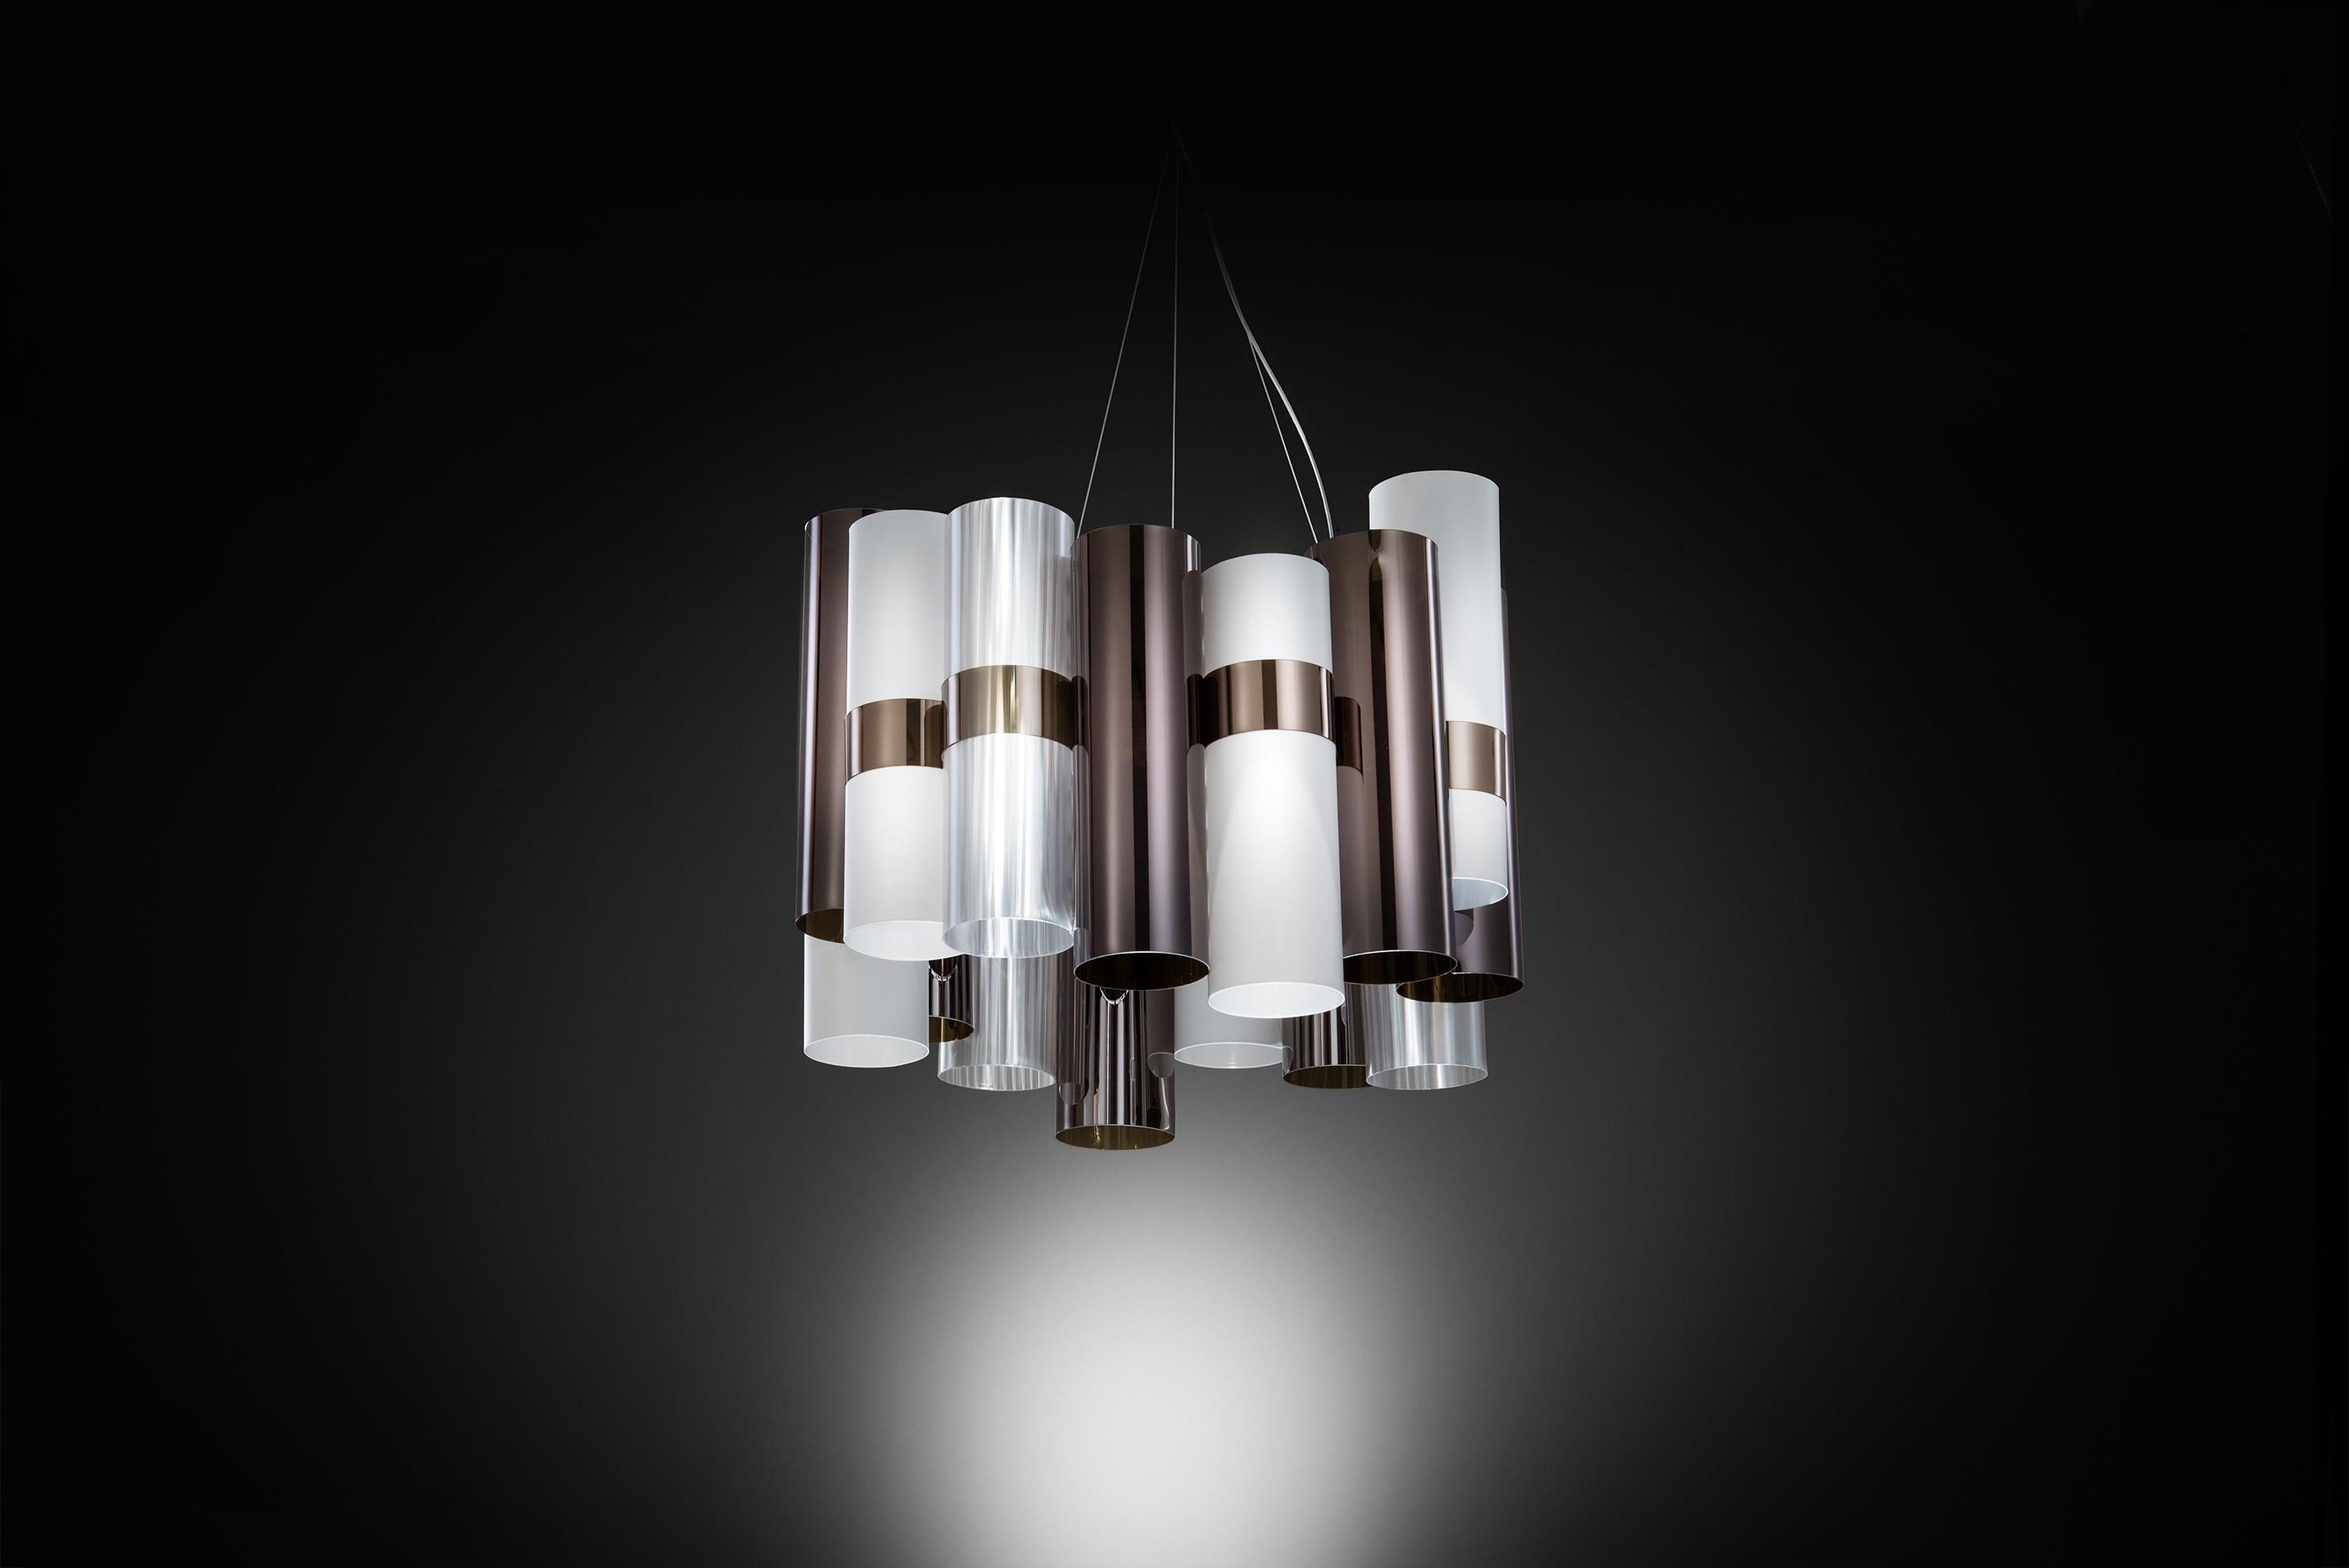 La Lollo is a tribute to the roaring 50’s, a series of graceful suspensions that reawaken images of divas in the spotlight. The patented techno-polymer cylinders, in varying shades of contemporary prismatic metallization and geometric patterns,